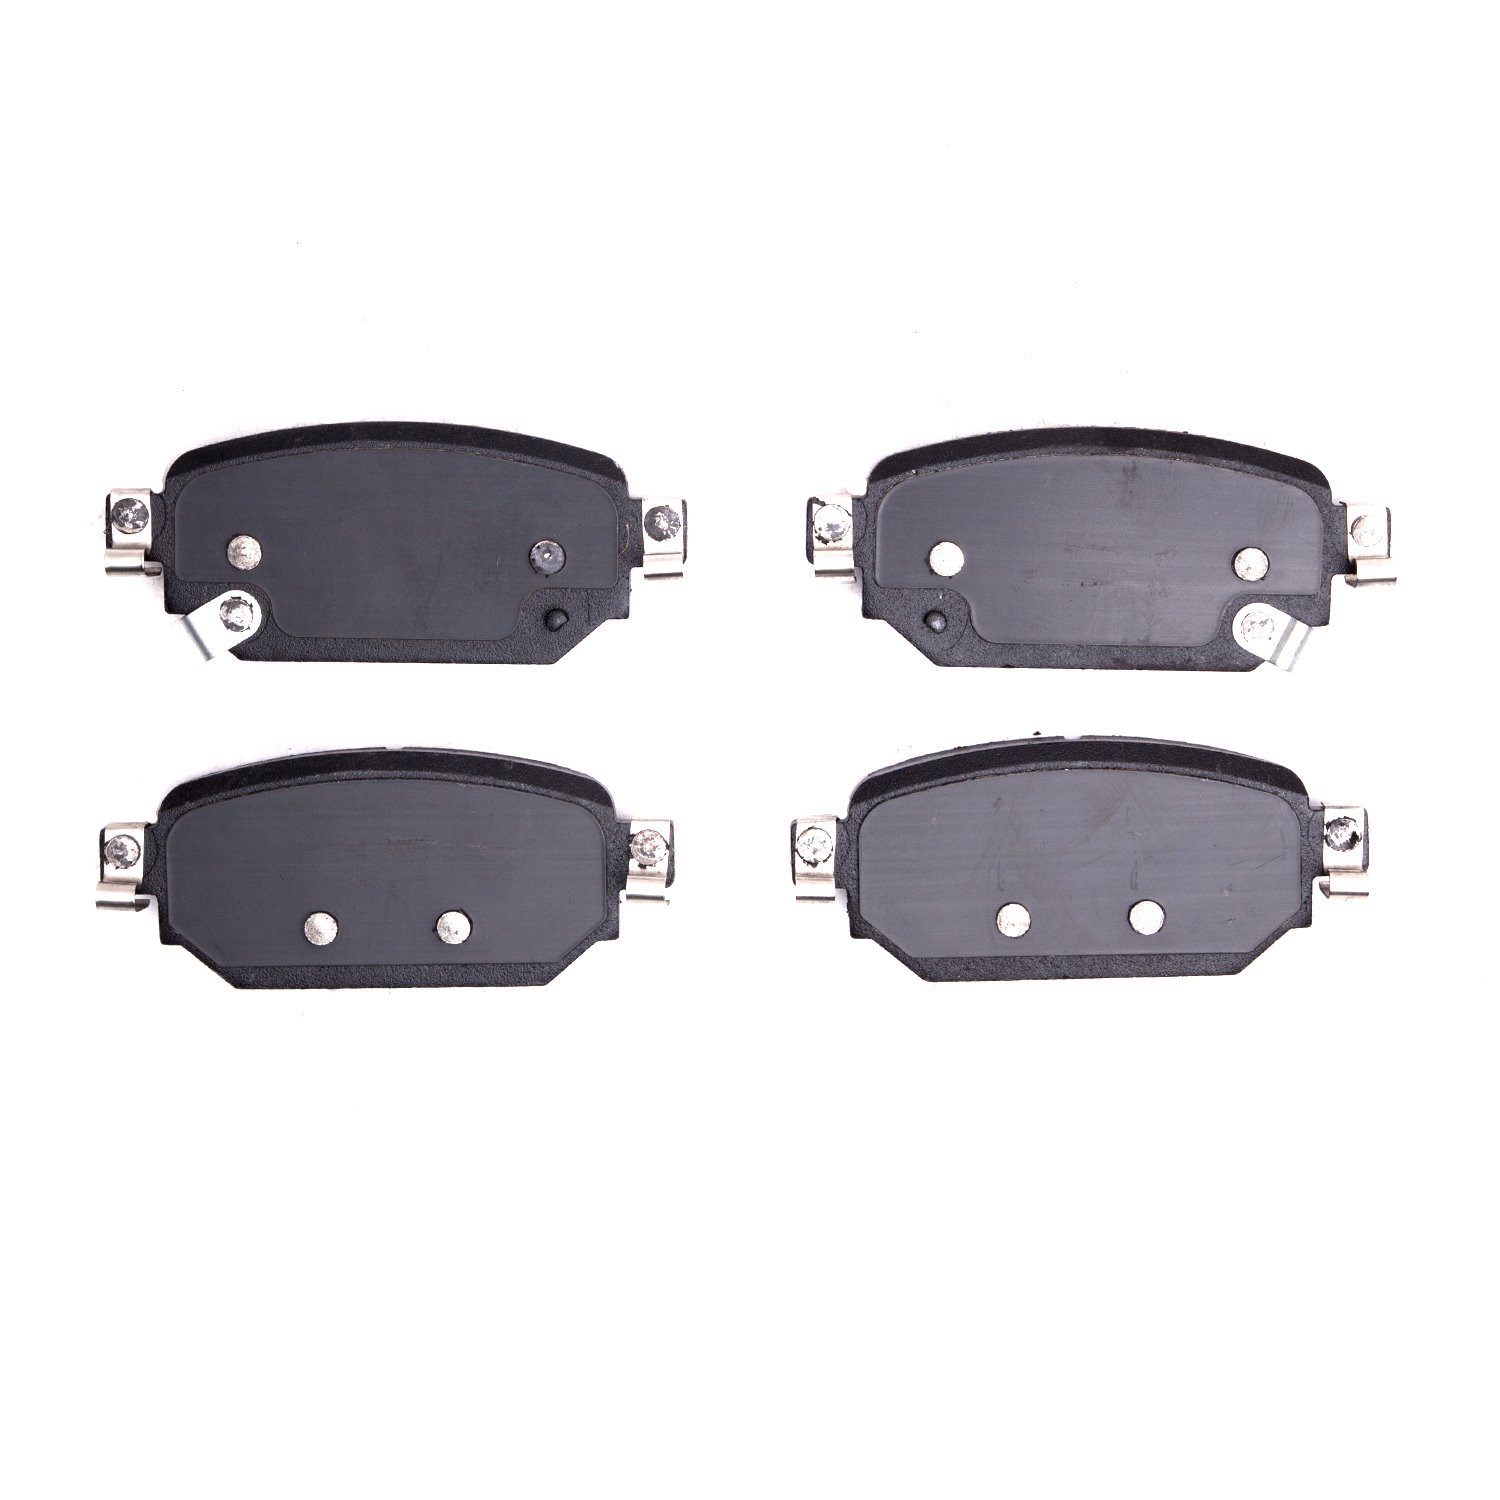 1310-2042-00 3000-Series Ceramic Brake Pads, Fits Select Ford/Lincoln/Mercury/Mazda, Position: Rear